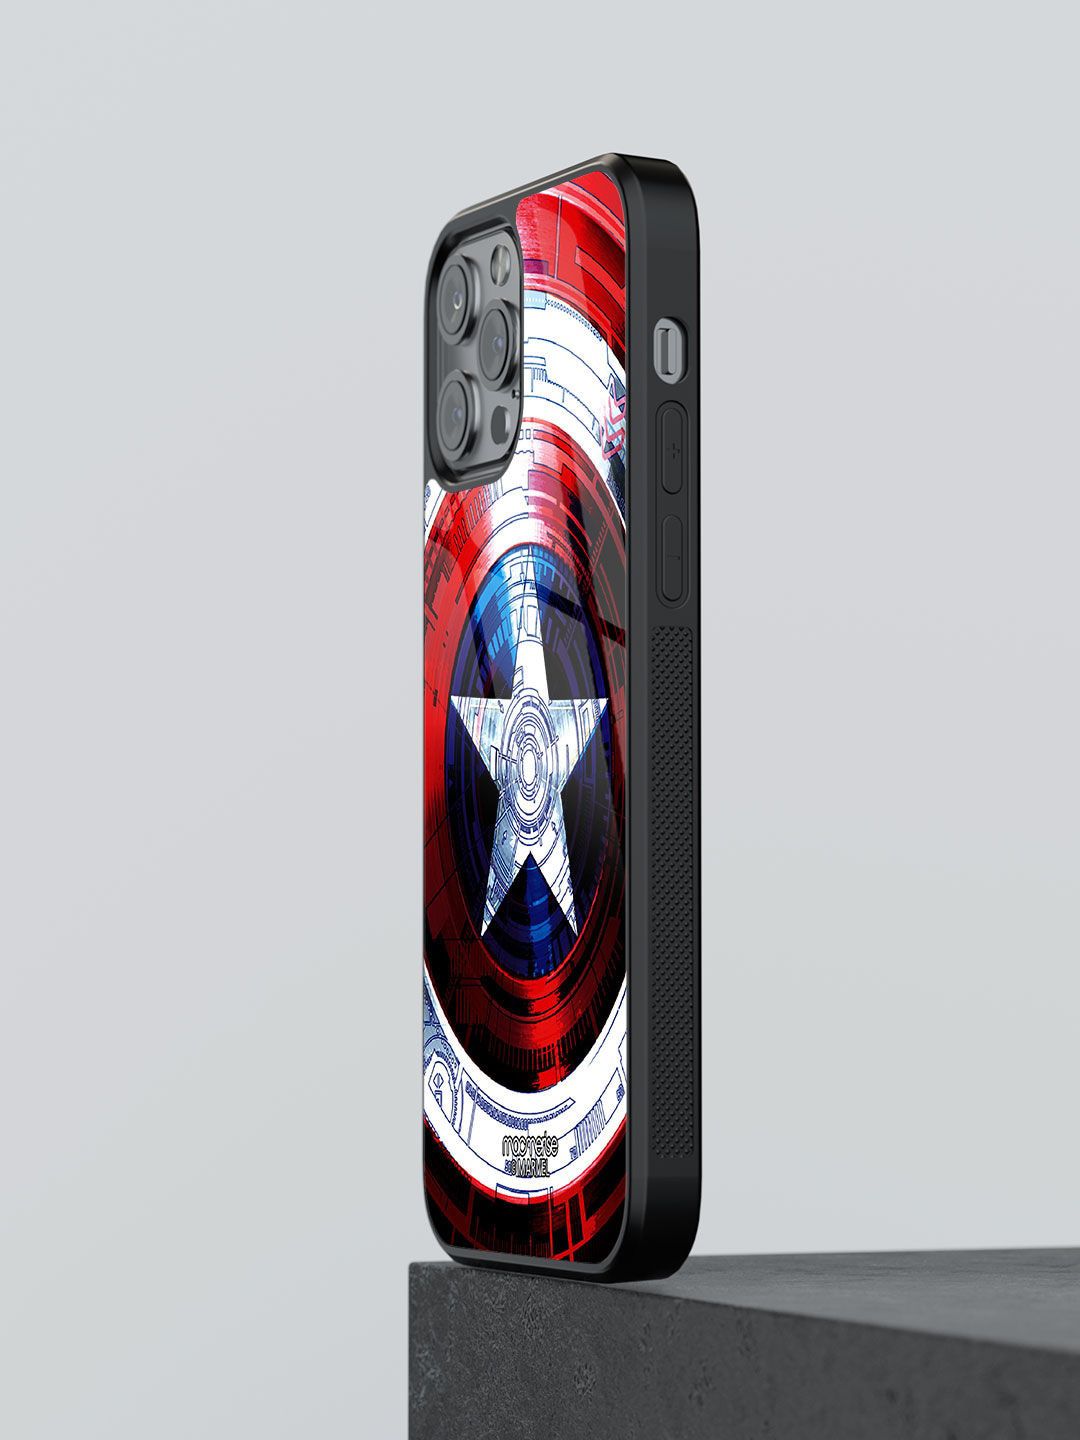 macmerise Red Printed Captains Shield Decoded iPhone 12 Pro Max Back Case Price in India